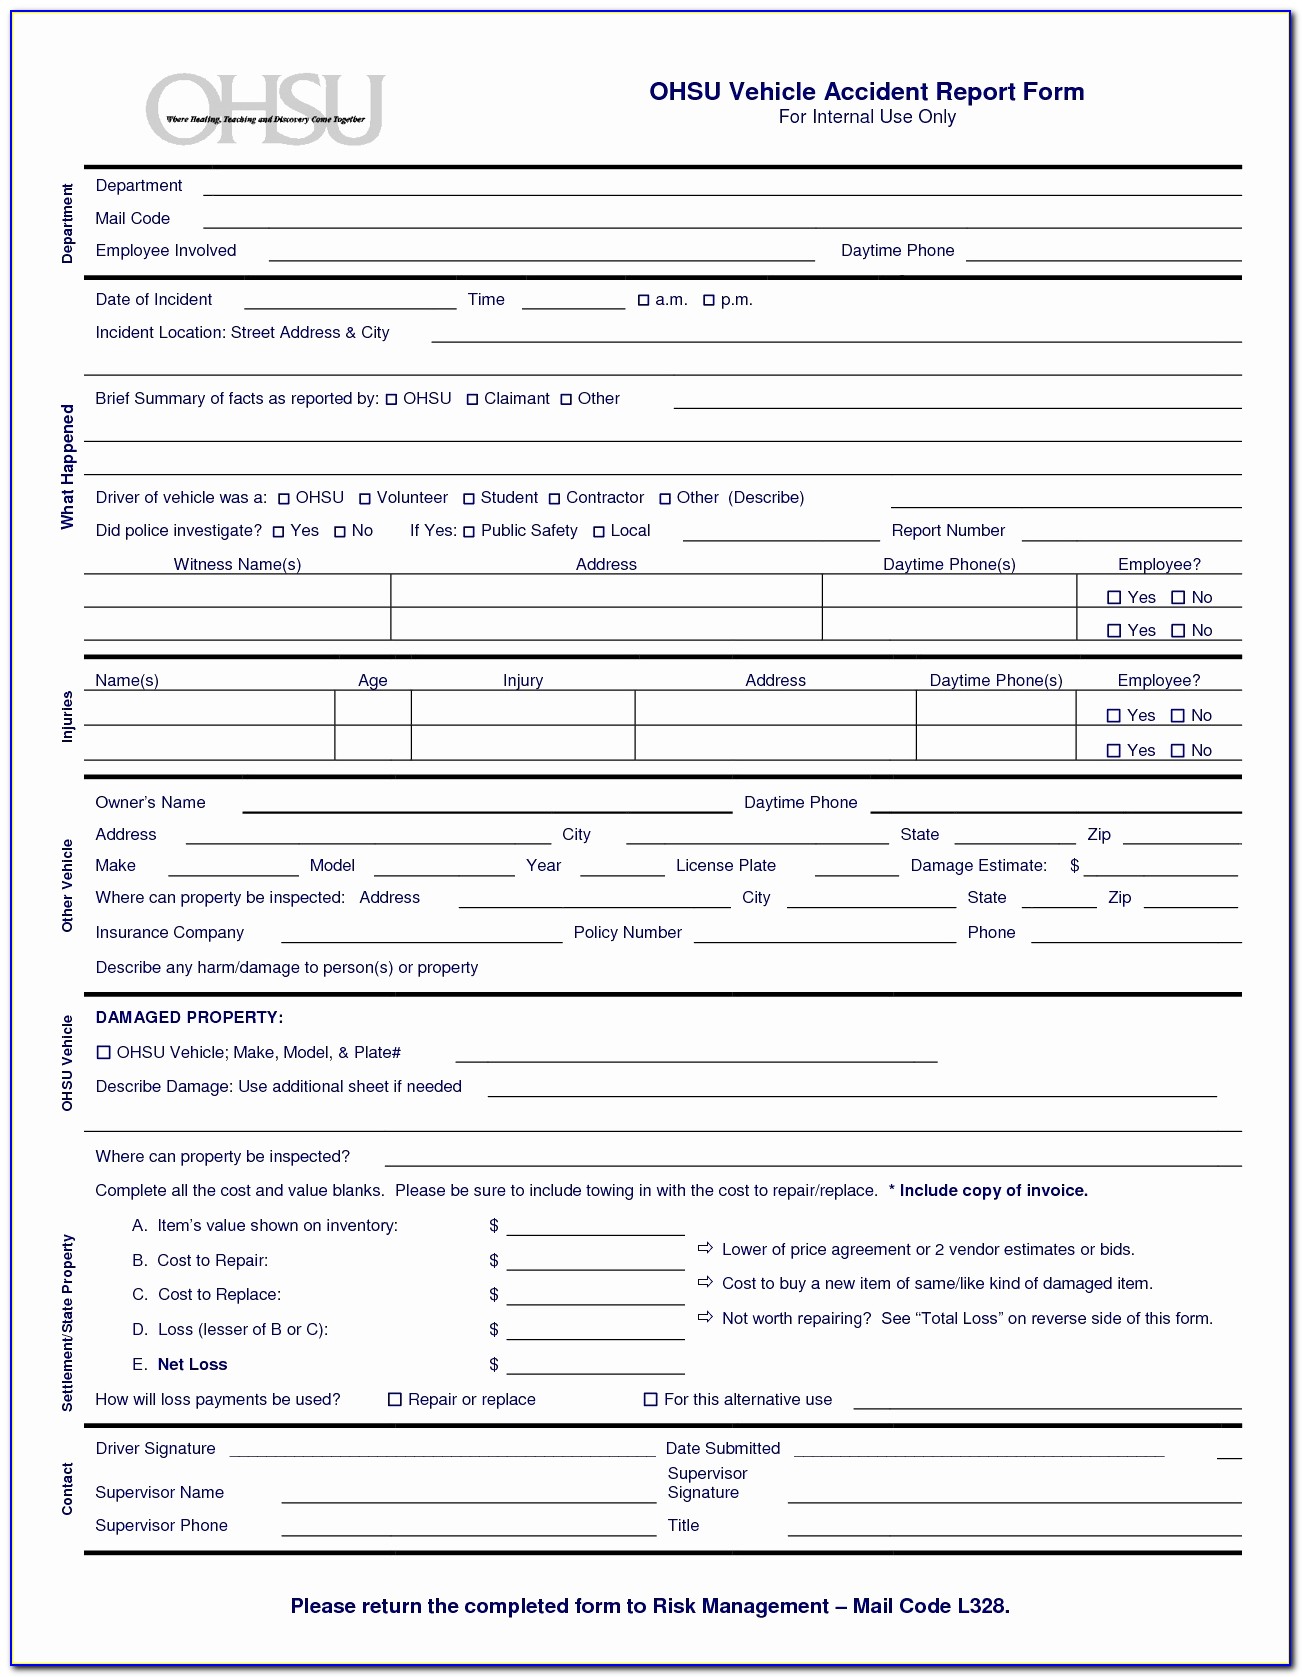 Auto Insurance Quote Form Template Best Of 50 Best Home Insurance Quote Sheet Documents Ideas Documents